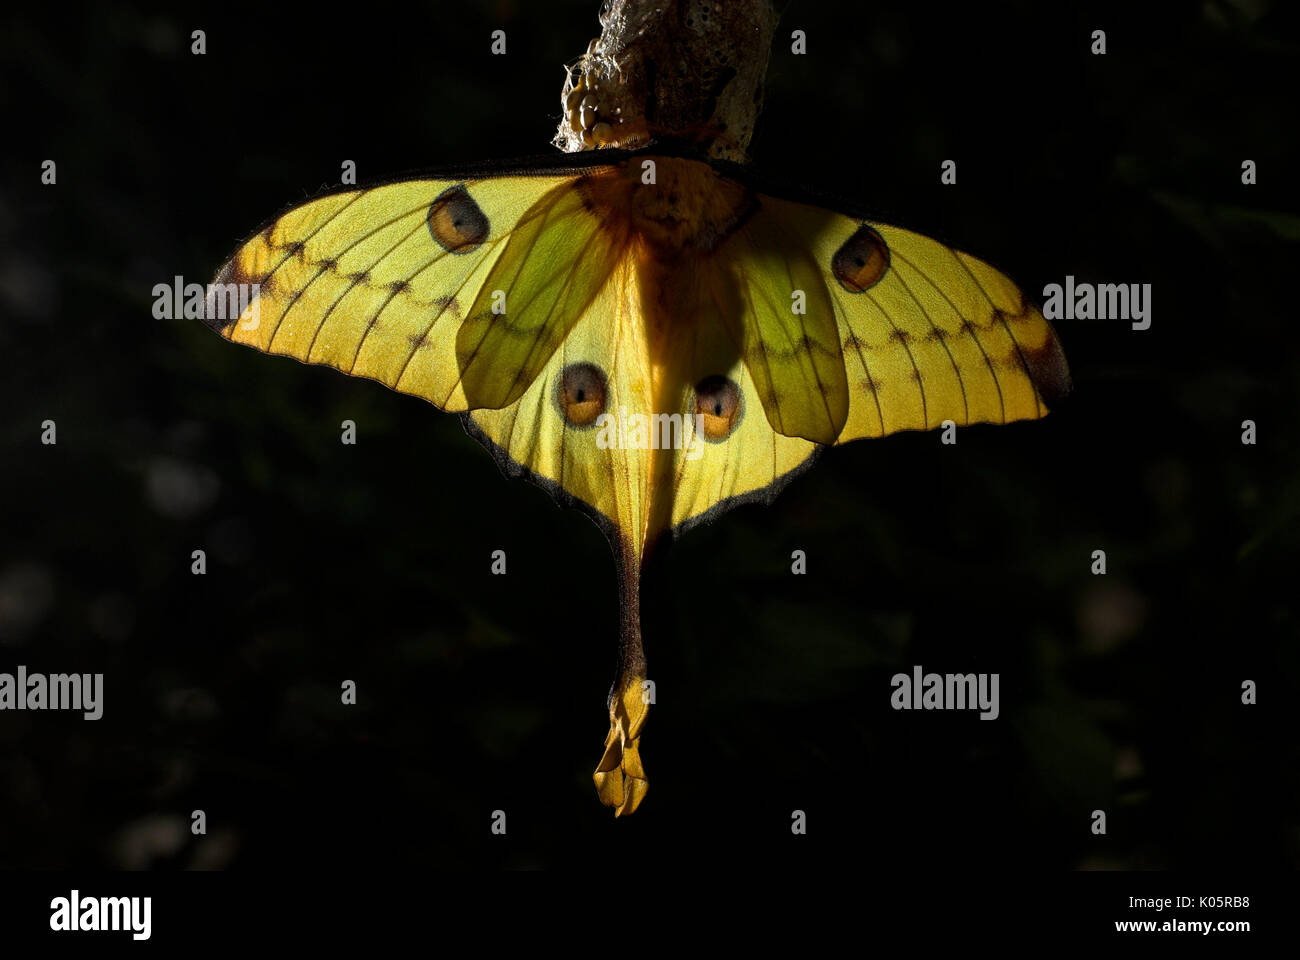 Giant Comet Moth, Argema mittrei, Madagascar, Moon or Lunar, Family: Saturniidae, one of the largest Silk Moths, hanging on cocoon, backlight Stock Photo